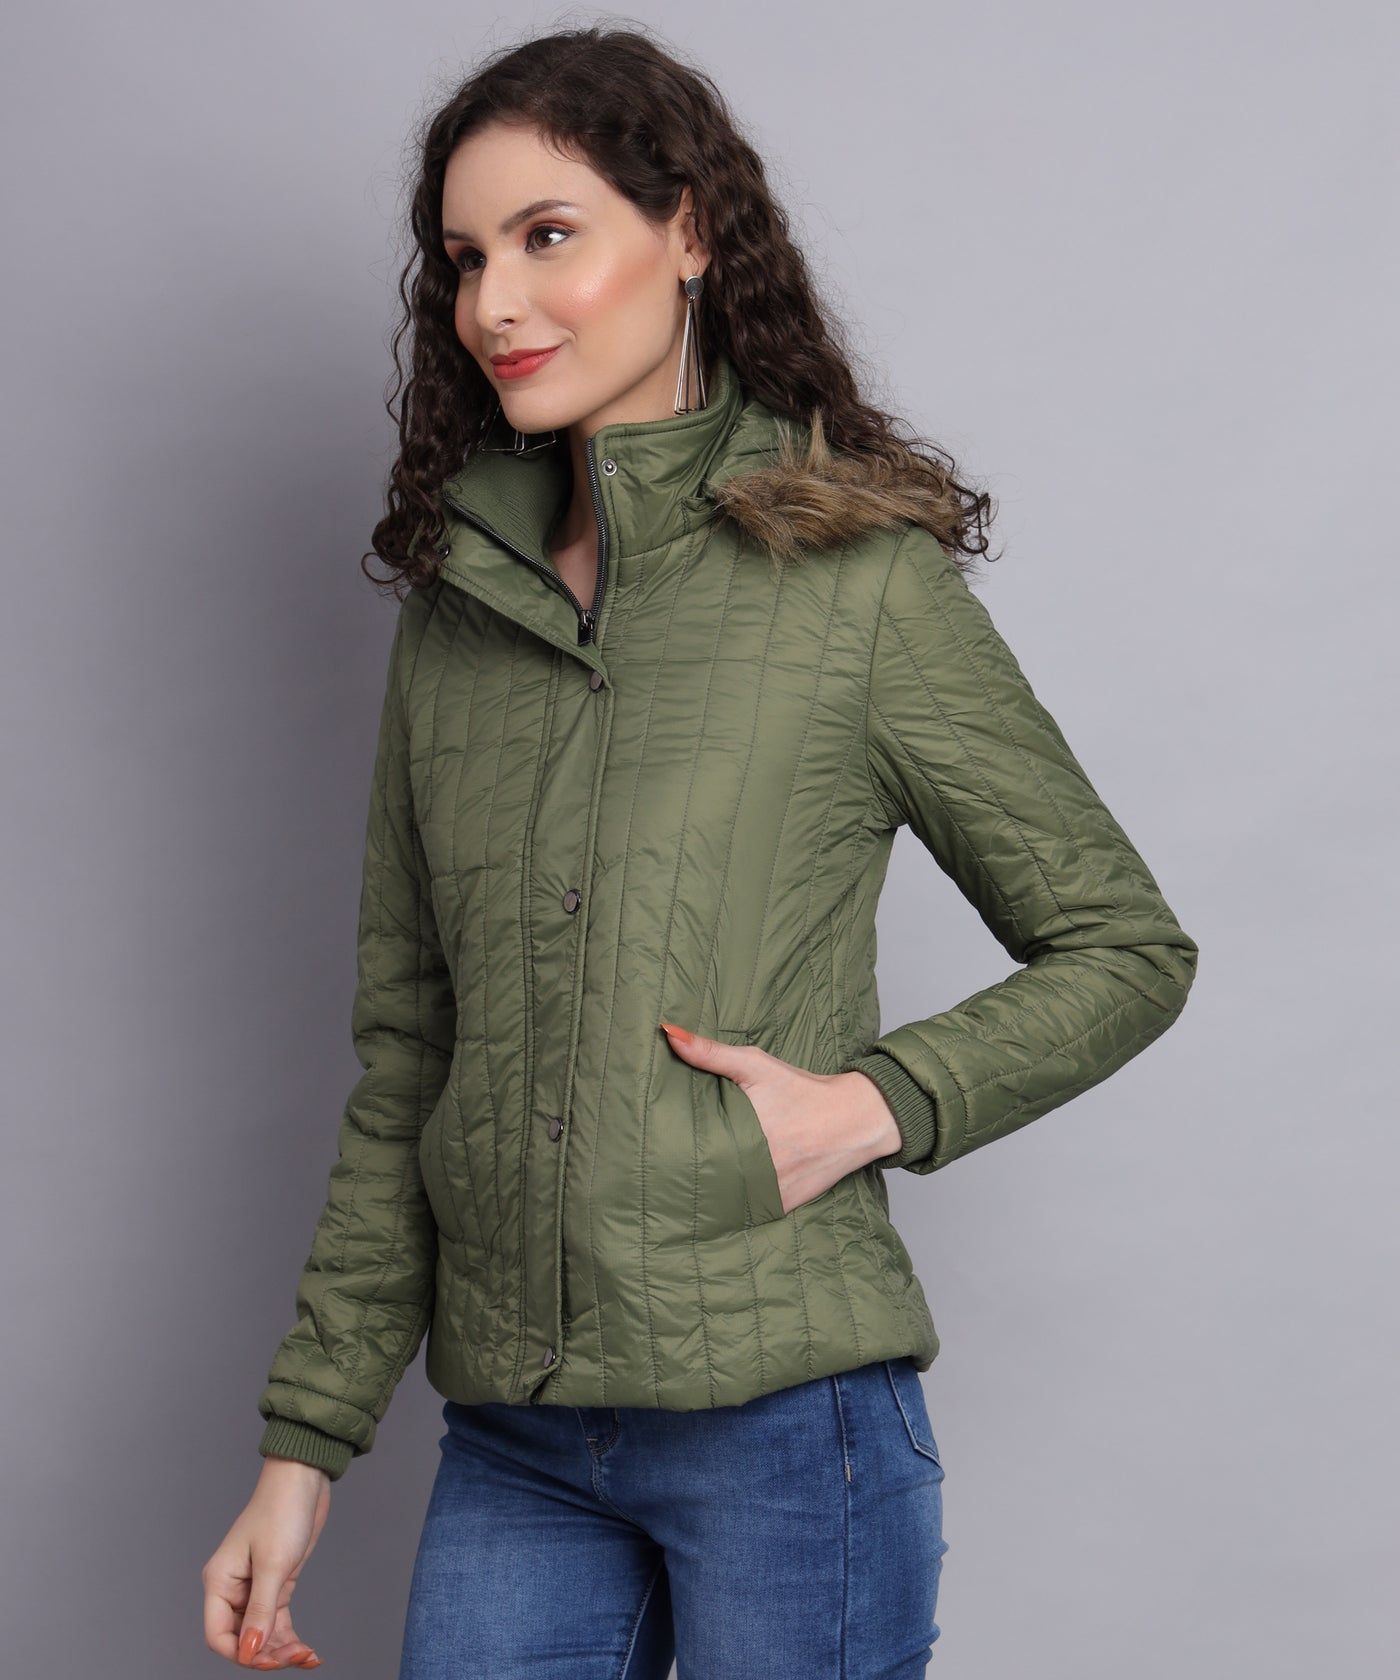 Olive diamond quilted jacket- AW6138